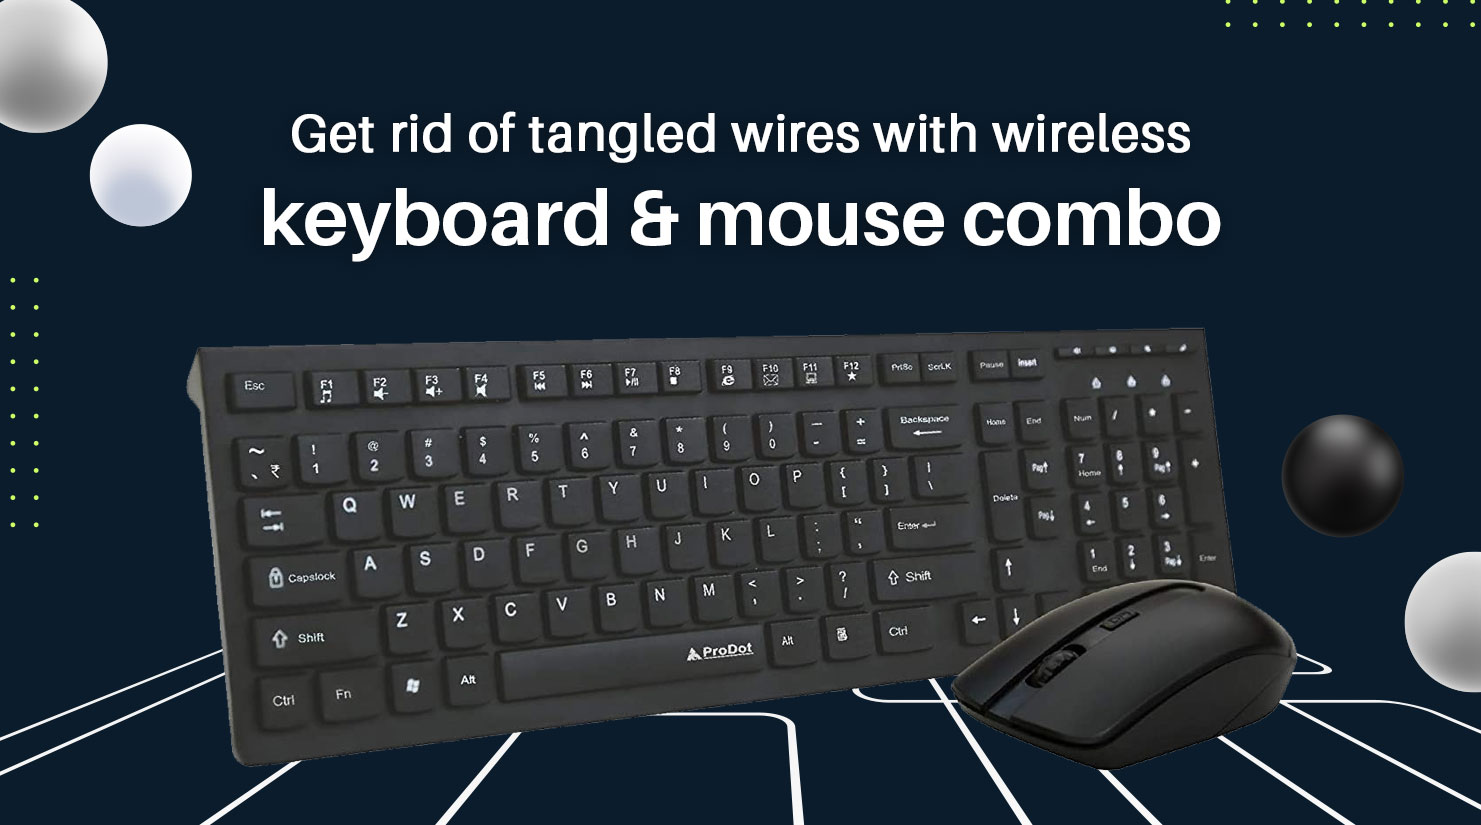 get rid of tangled wires with the prodot wireless keyboard and mouse combo